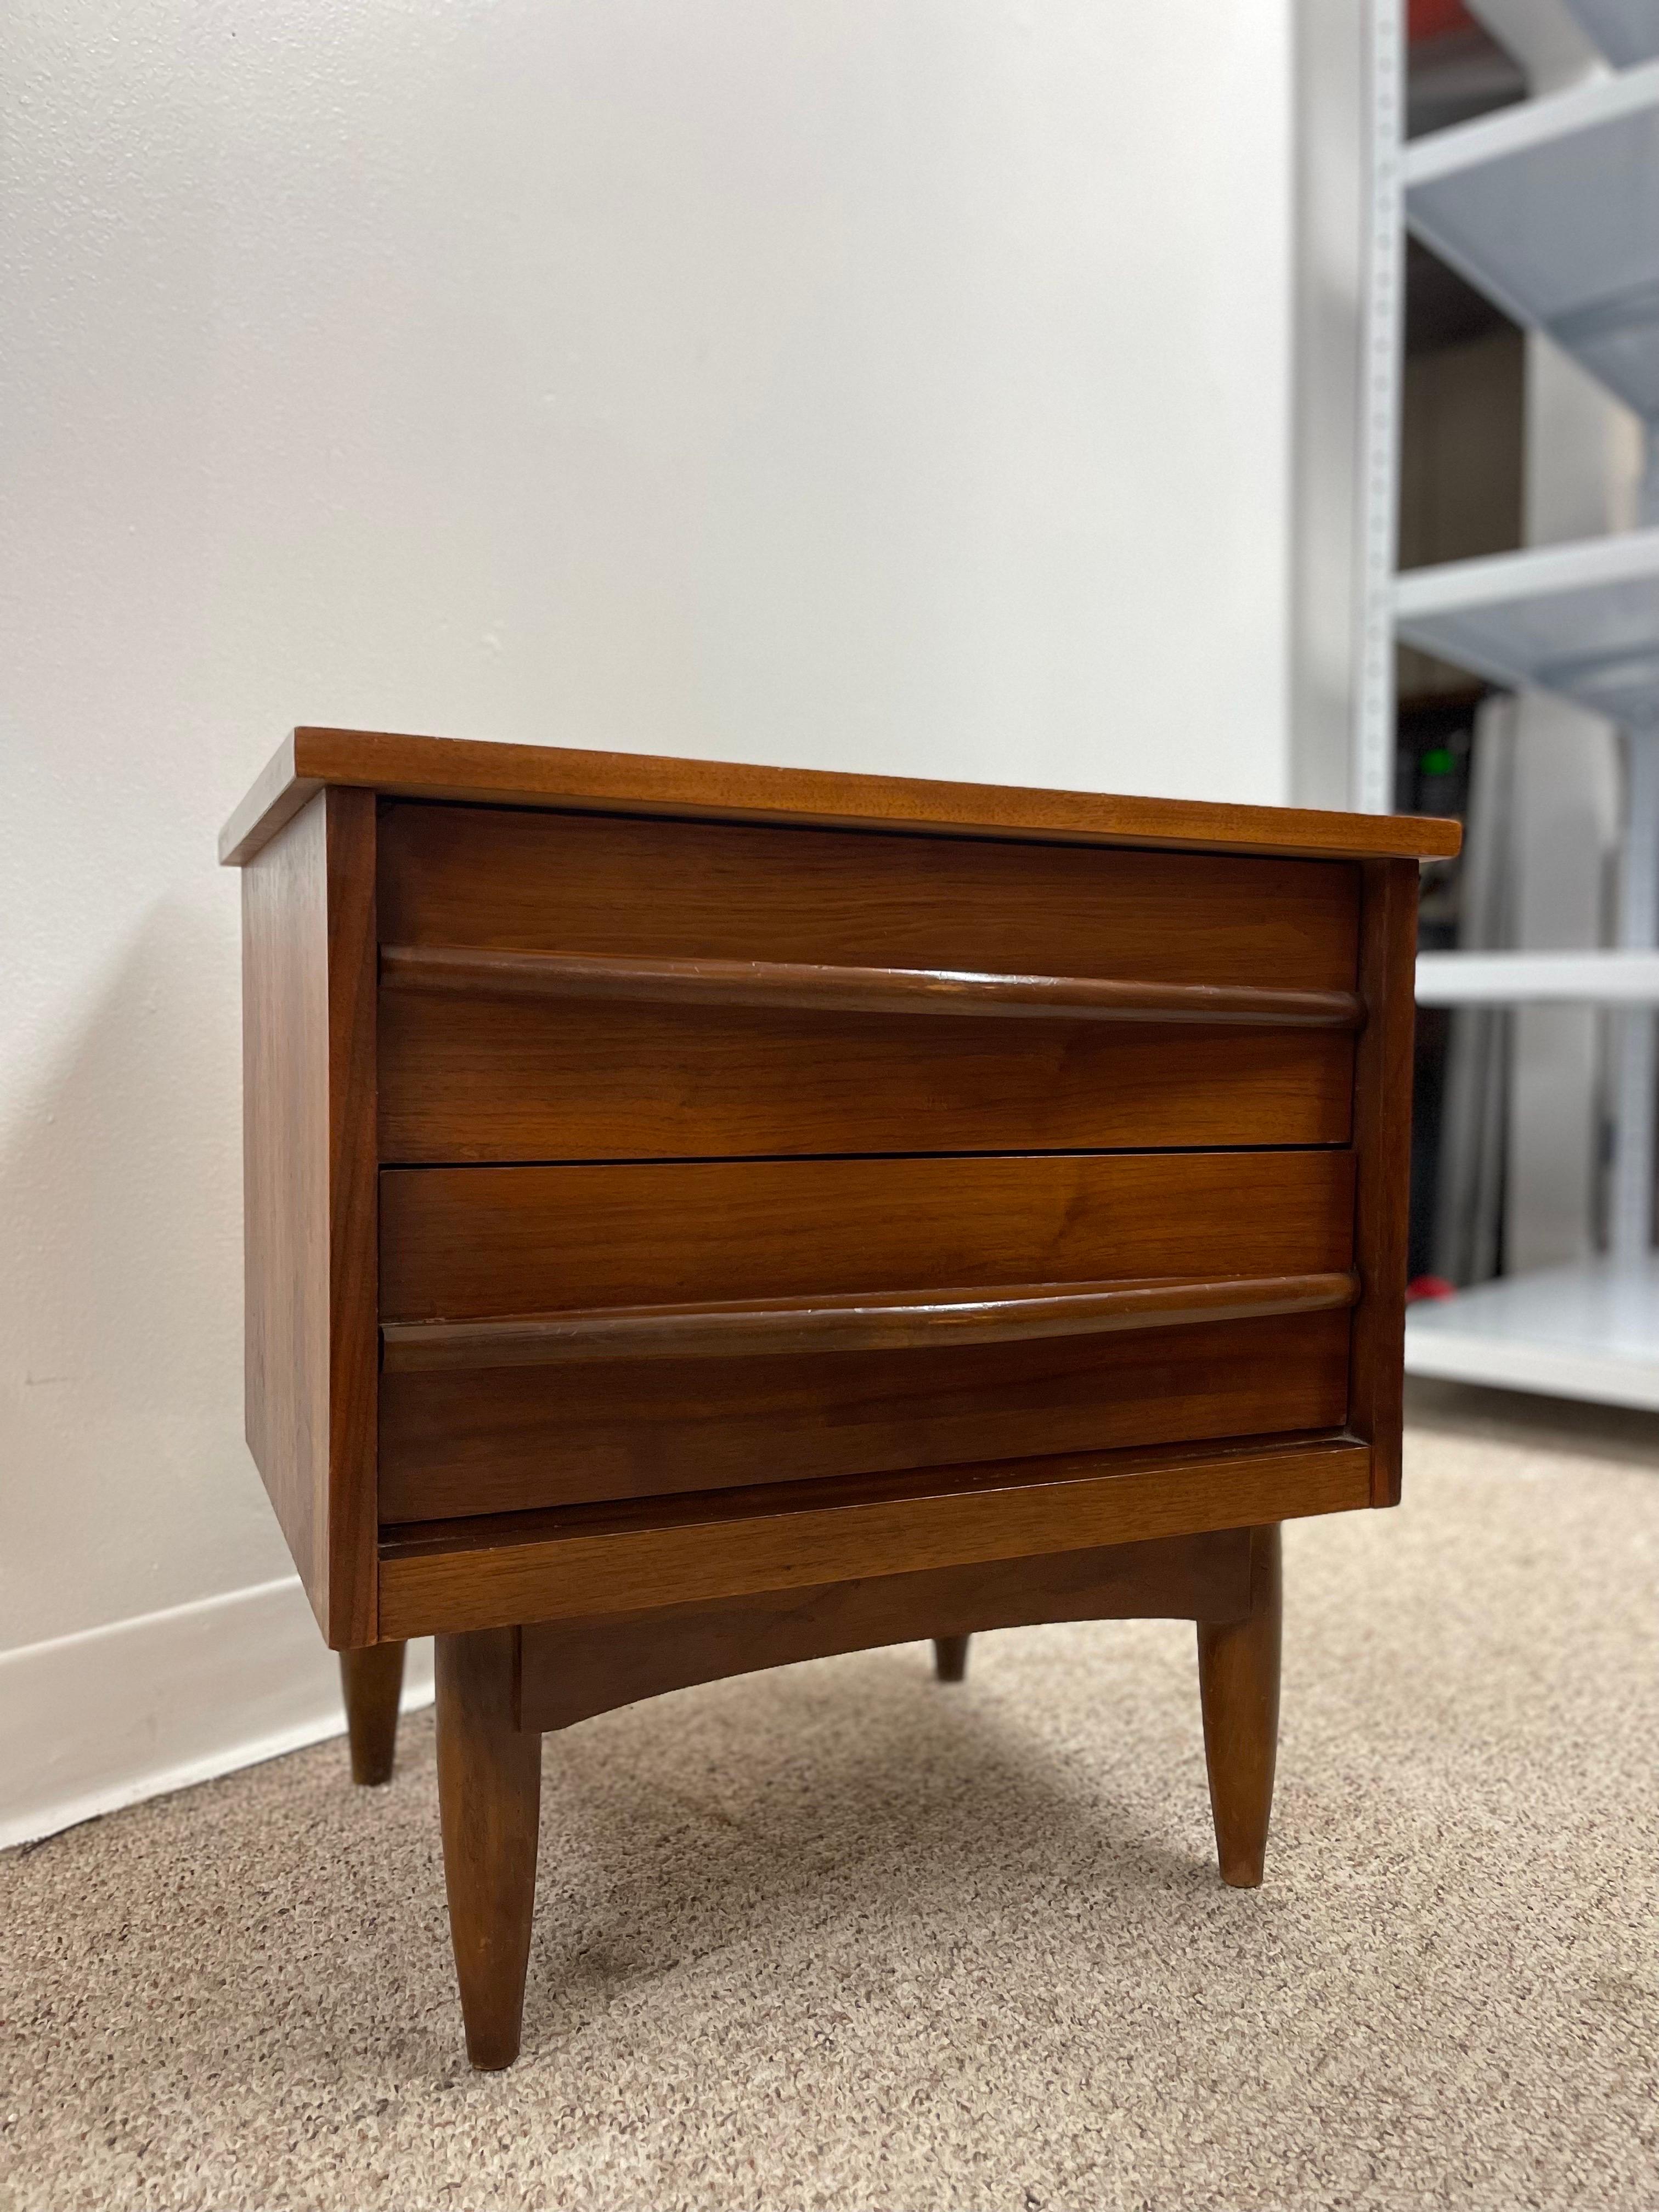 Vintage Mid-Century Modern night stand with Dovetail srawers 

Dimensions. 22 W ; 15 D ; 22 H.